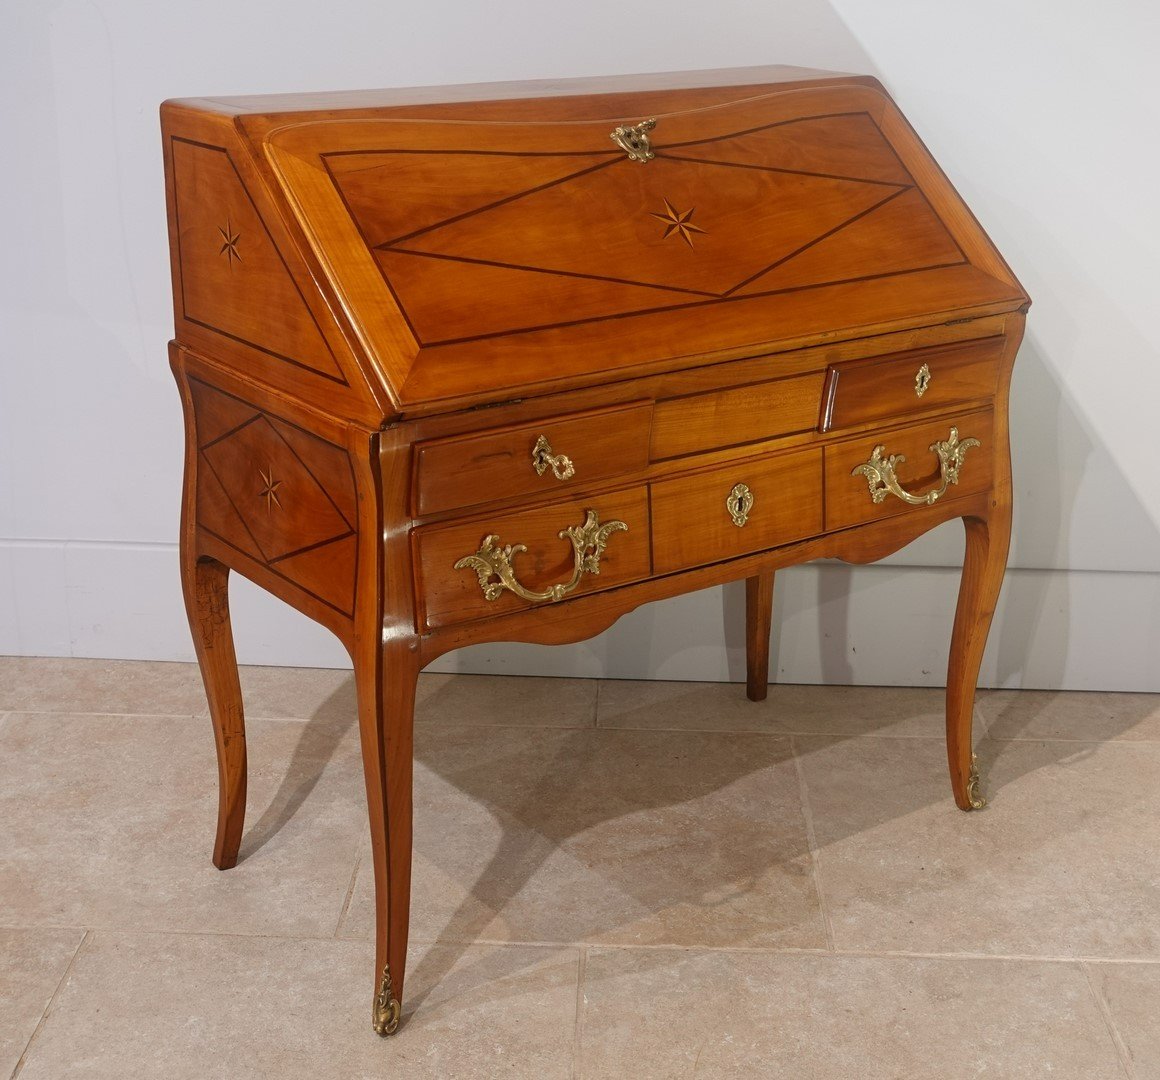 Donkey's Desk Or Louis XV Sloping Desk From The 18th Century